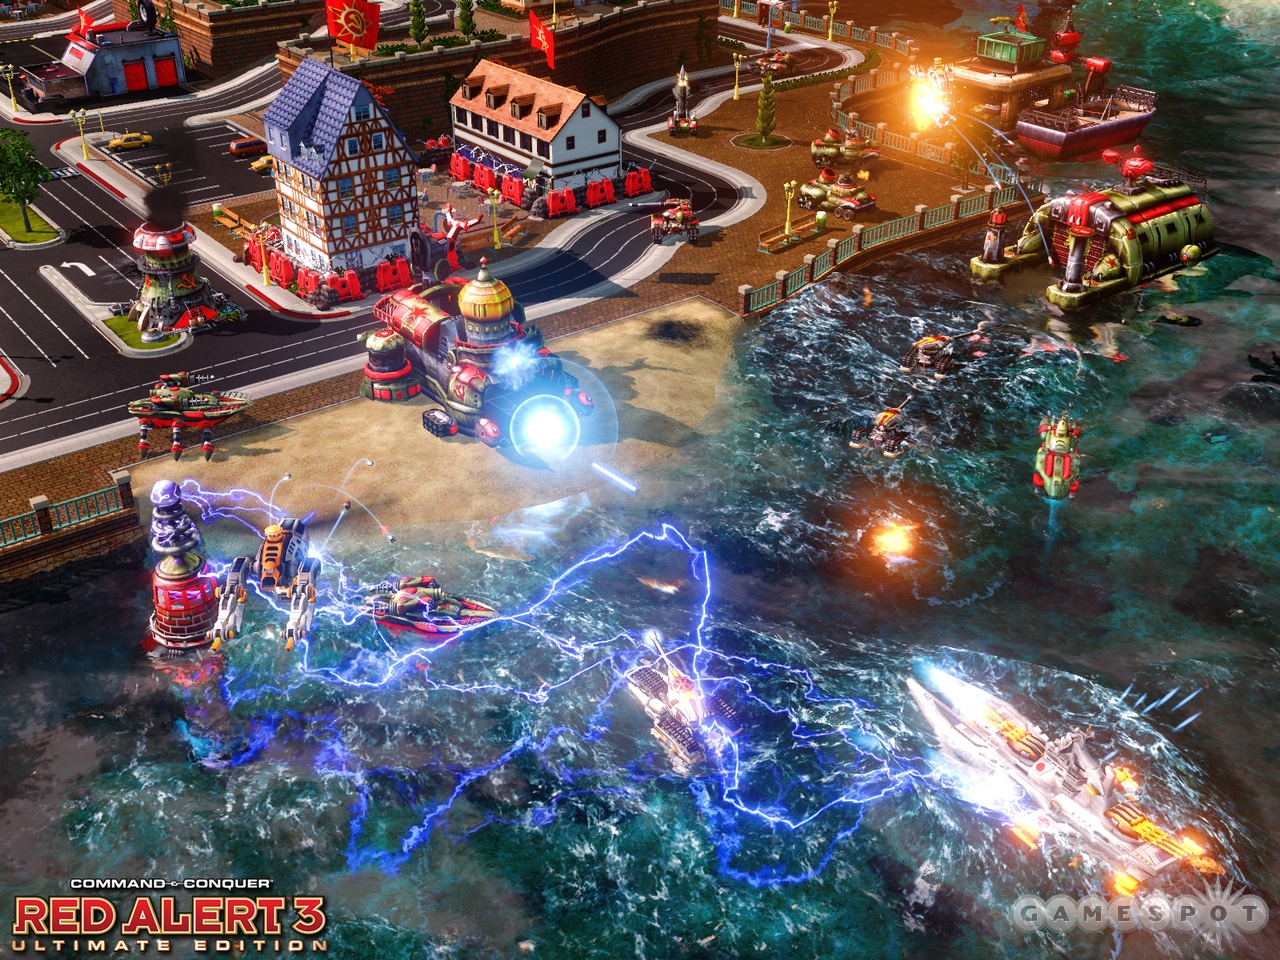 Red Alert 3 will be arriving on PS3 with tons of bonus content and a brighter color palette.